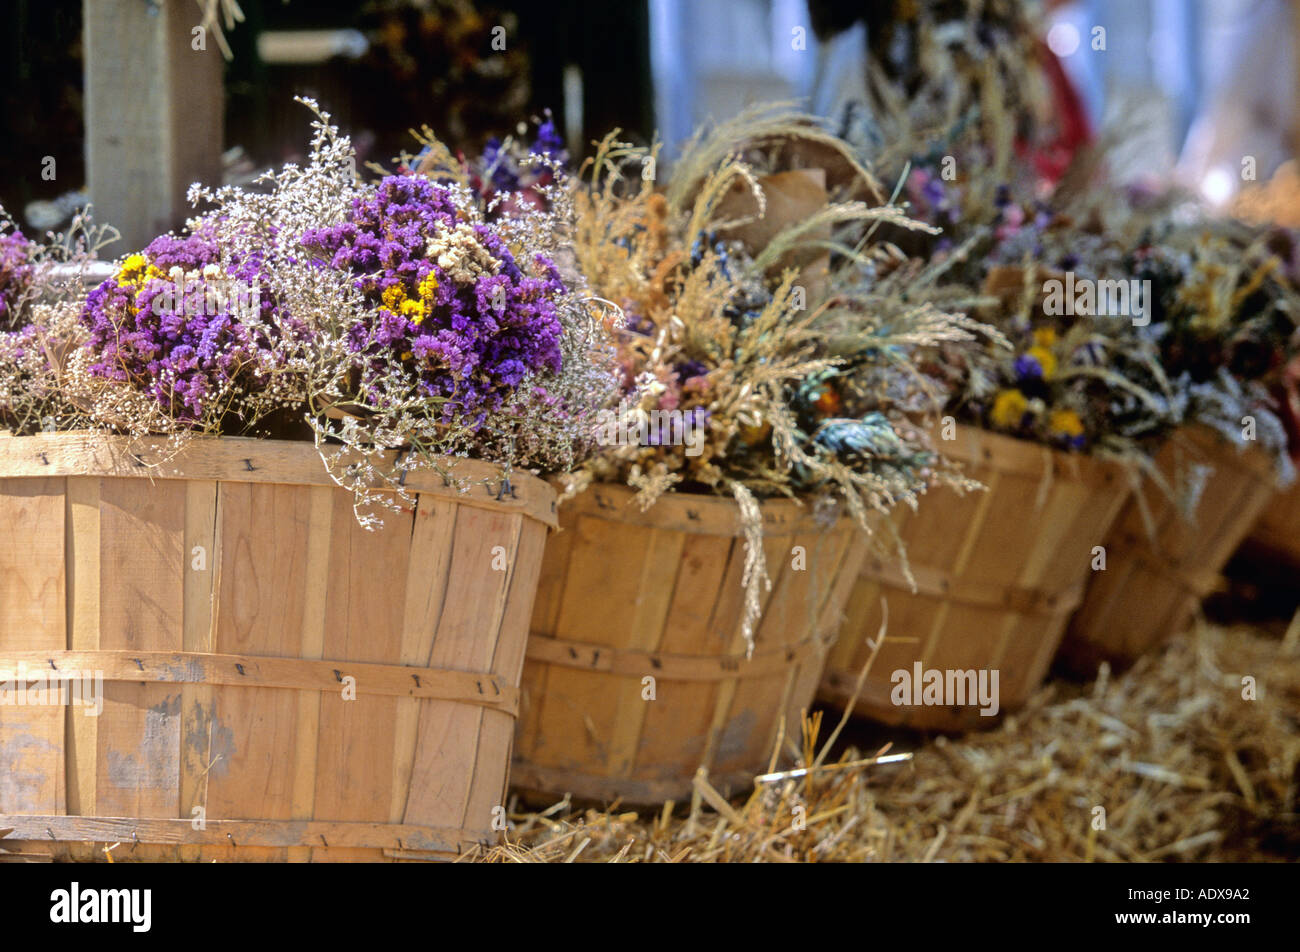 Baskets of herbs  Stock Photo